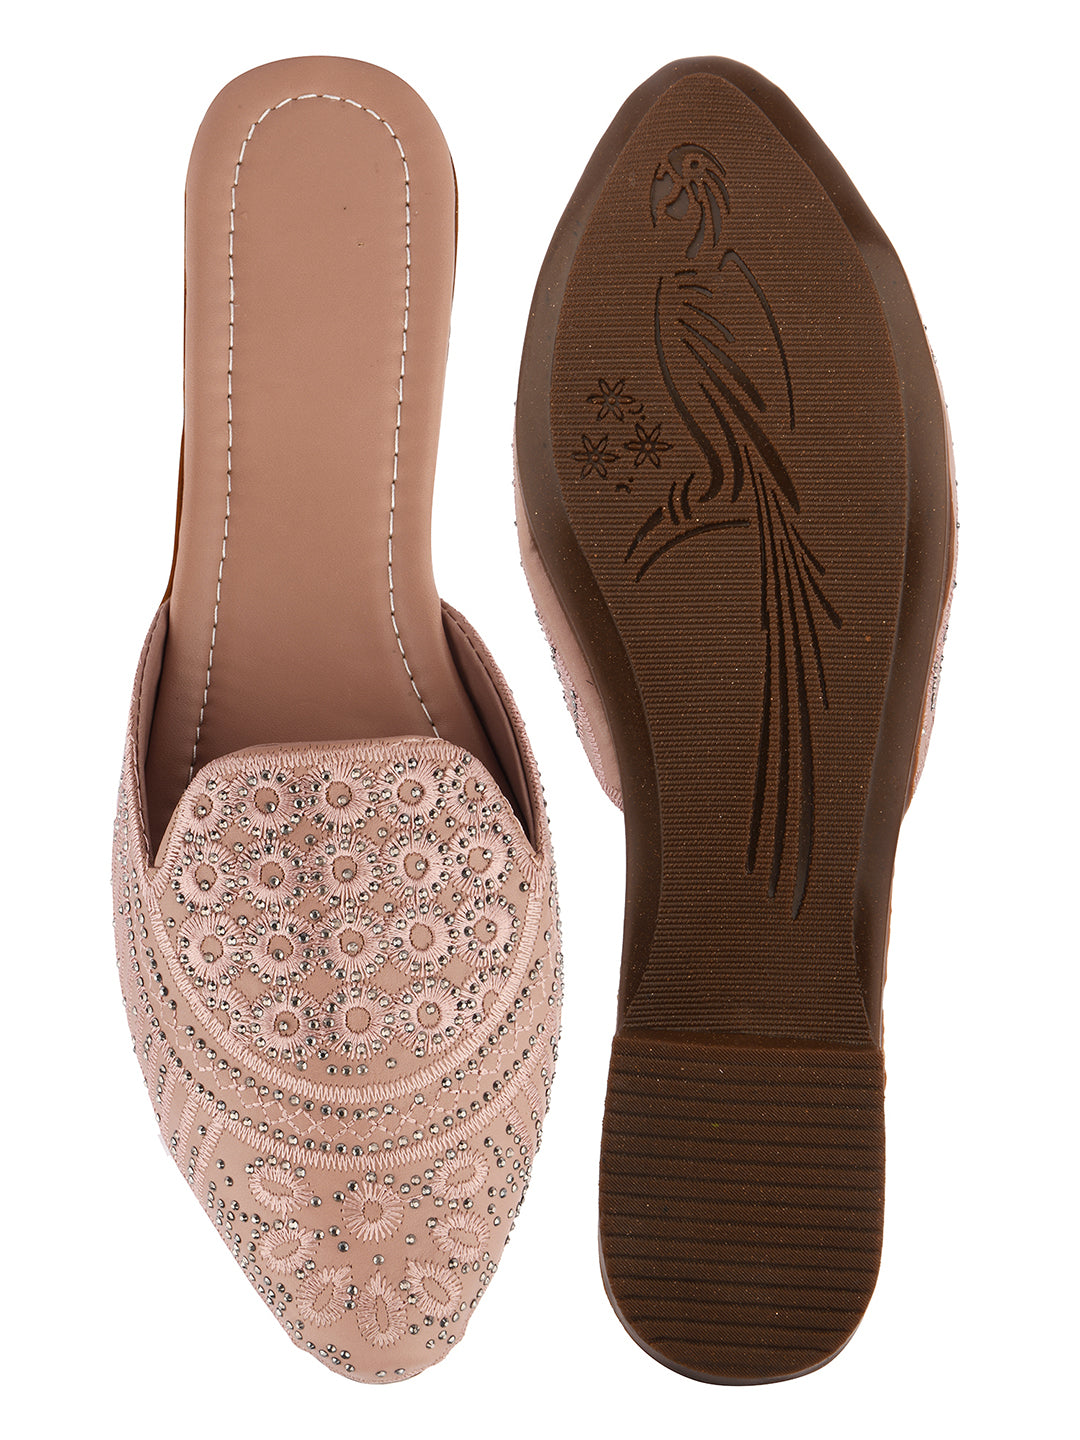 DESI COLOUR Women Peach-Coloured Embellished Leather Ethnic Mules Flats